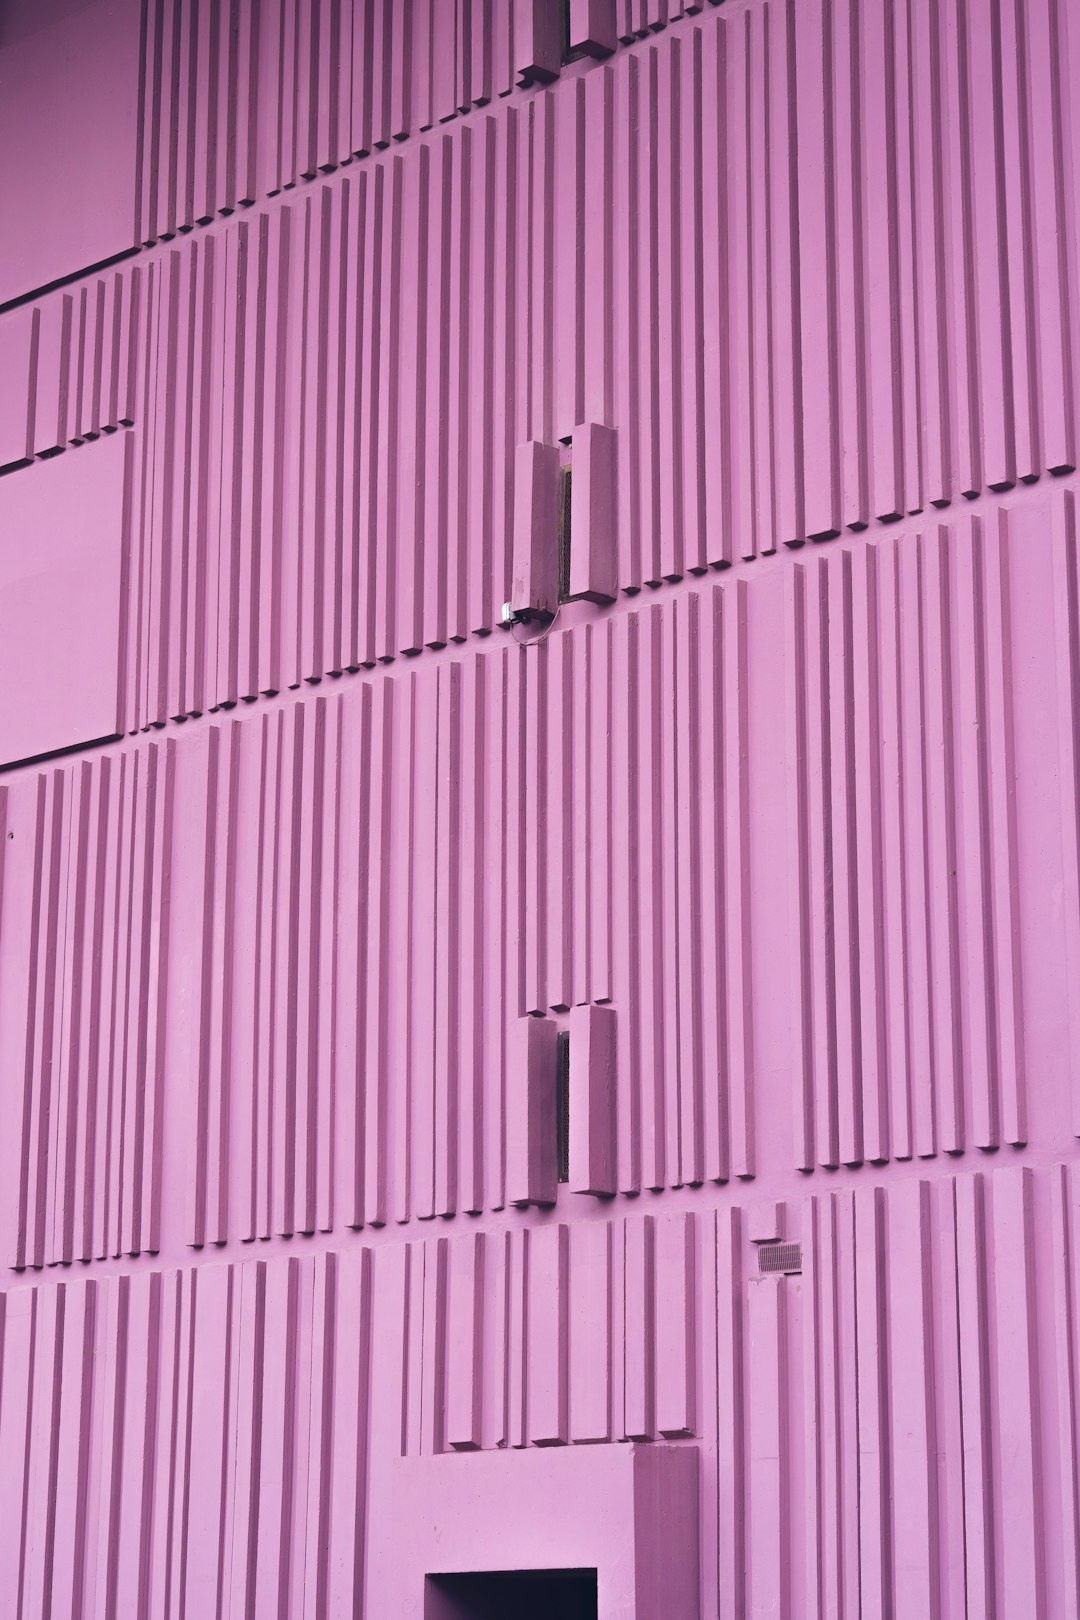 Pink metal wall with vertical lines, front view, pink purple color scheme, simple background, building facade photography, front closeup, symmetrical composition, bright light, minimalism, architectural details, architectural appearance, and sense of space. The building is made up of many small squares, which gives it an extremely interesting shape. This photo was taken by Sony Alpha A7 III camera. –ar 85:128